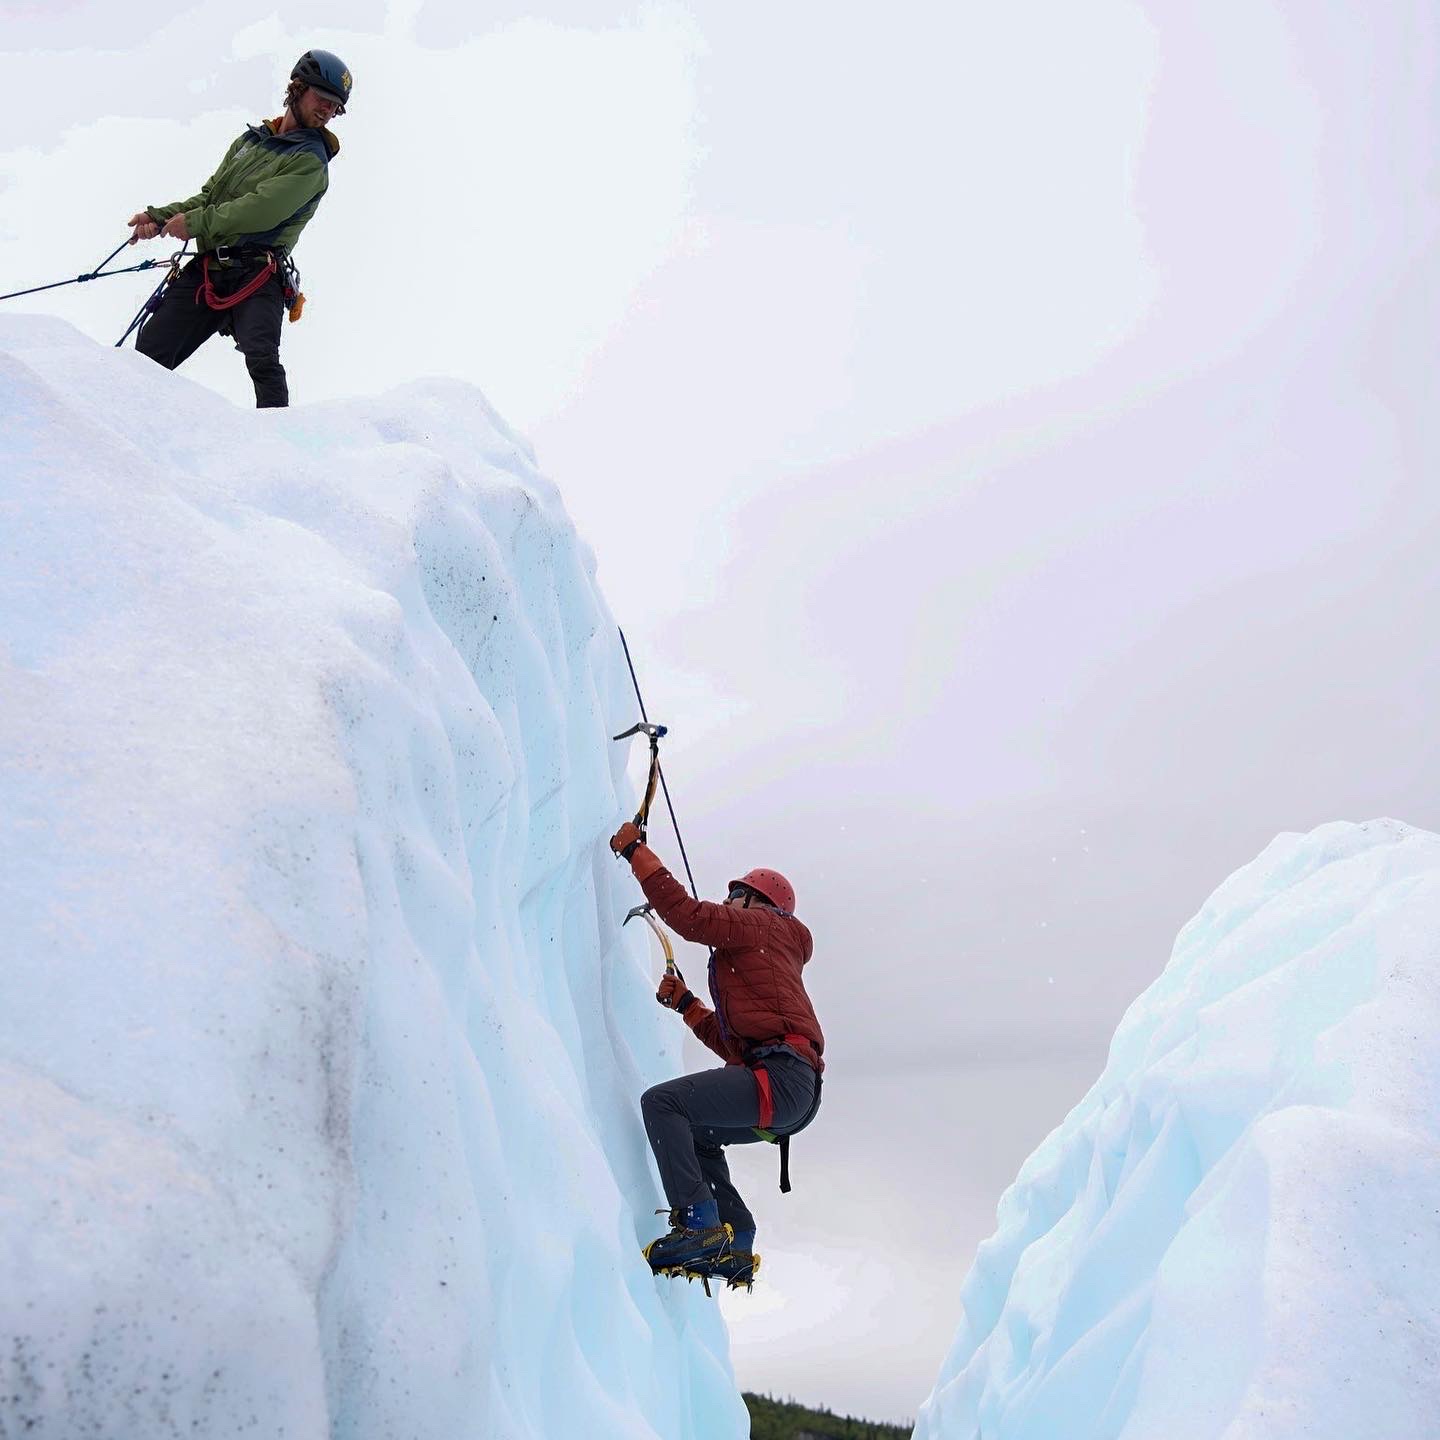 glacier guide uses rope to assist ice climber in glacier ice